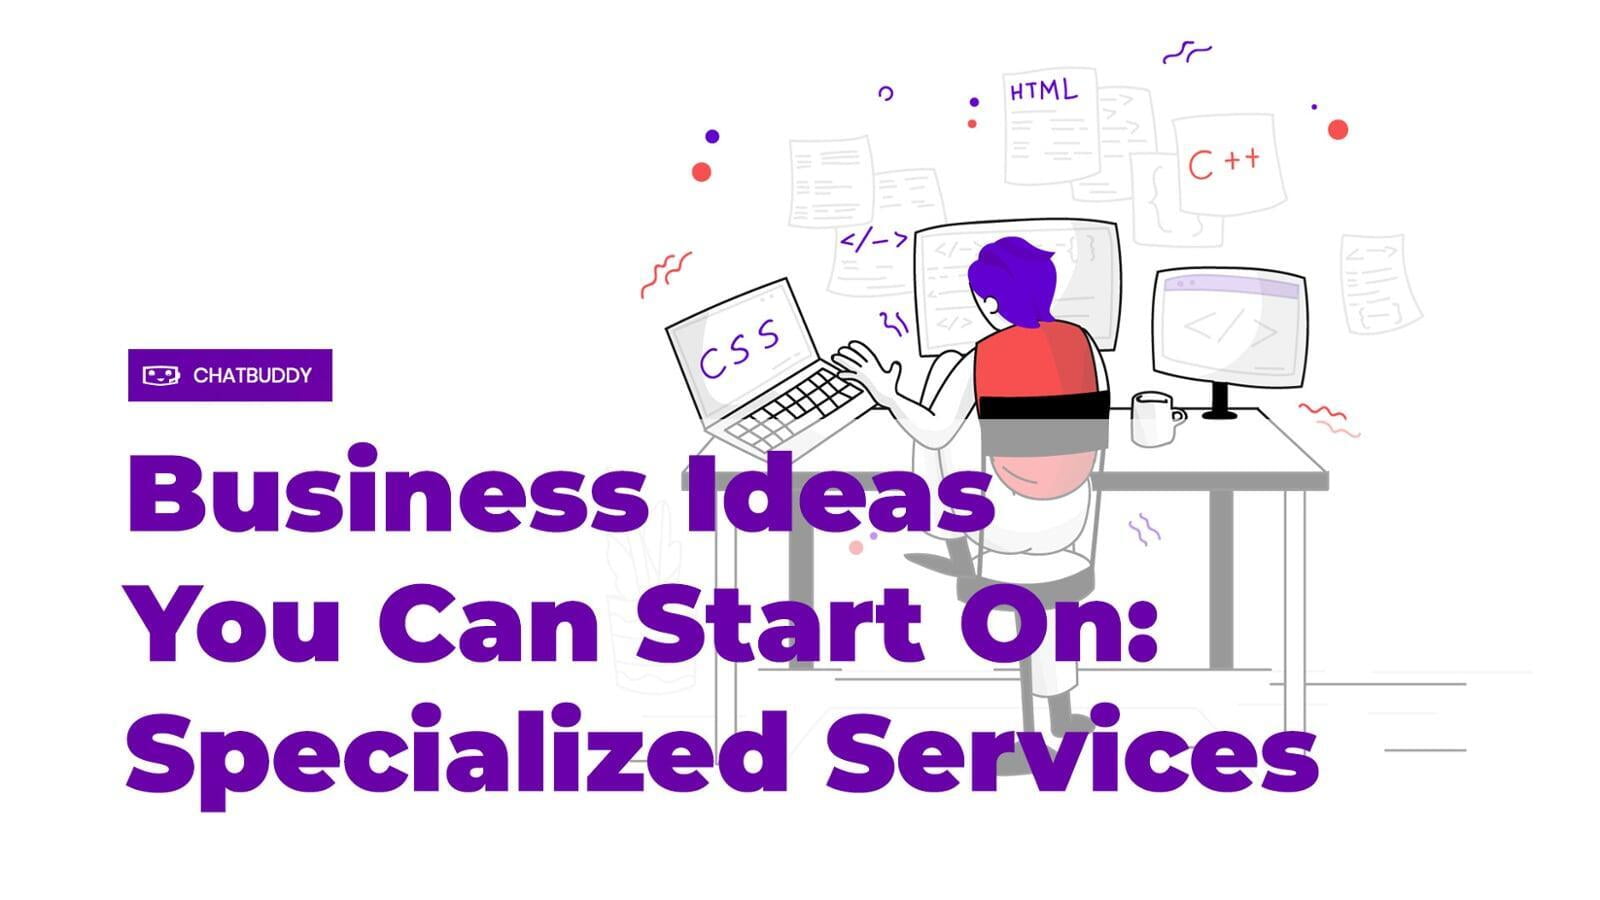 Business Ideas You Can Start On: Specialized Services